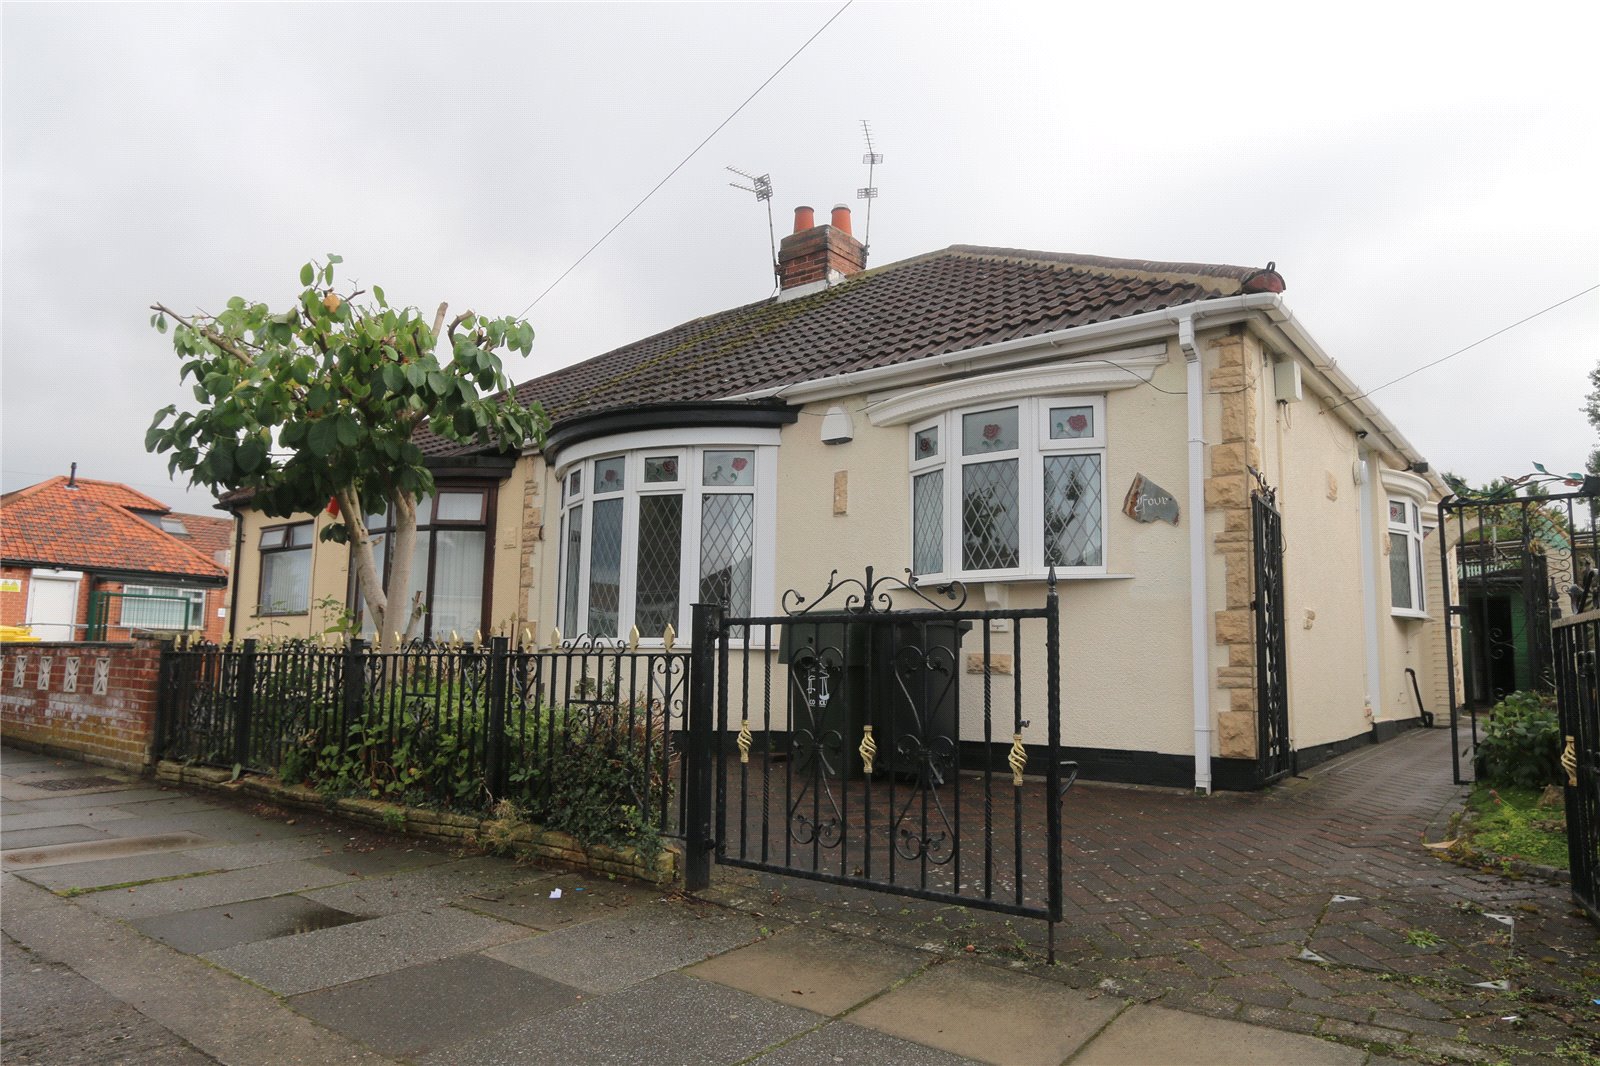 2 bed bungalow to rent - Property Image 1